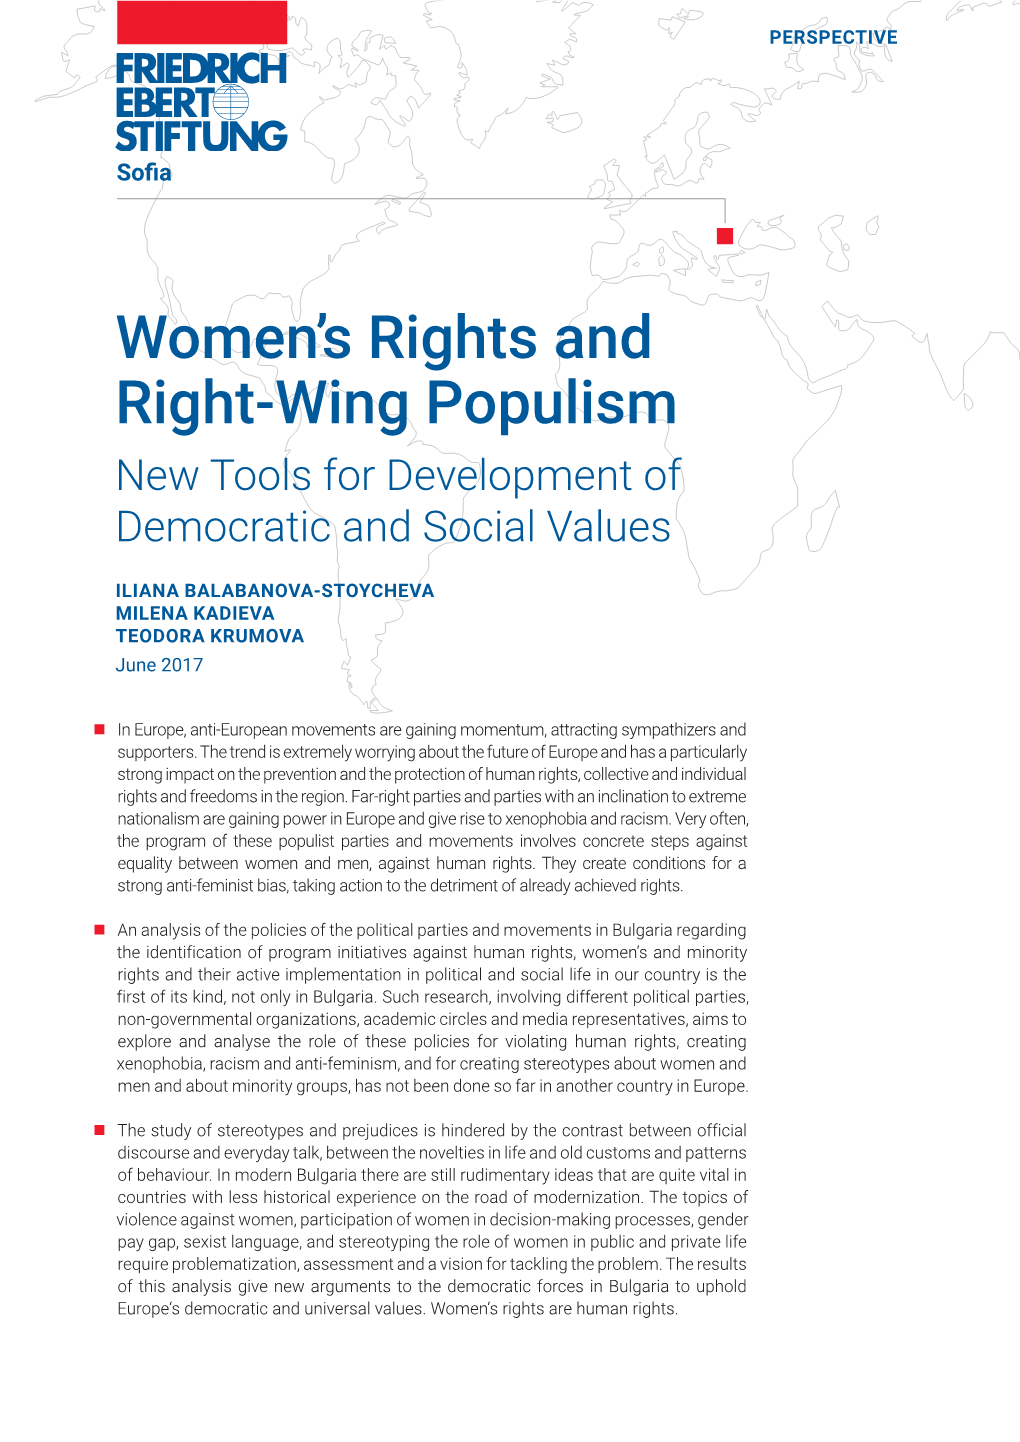 Women's Rights and Right-Wing Populism